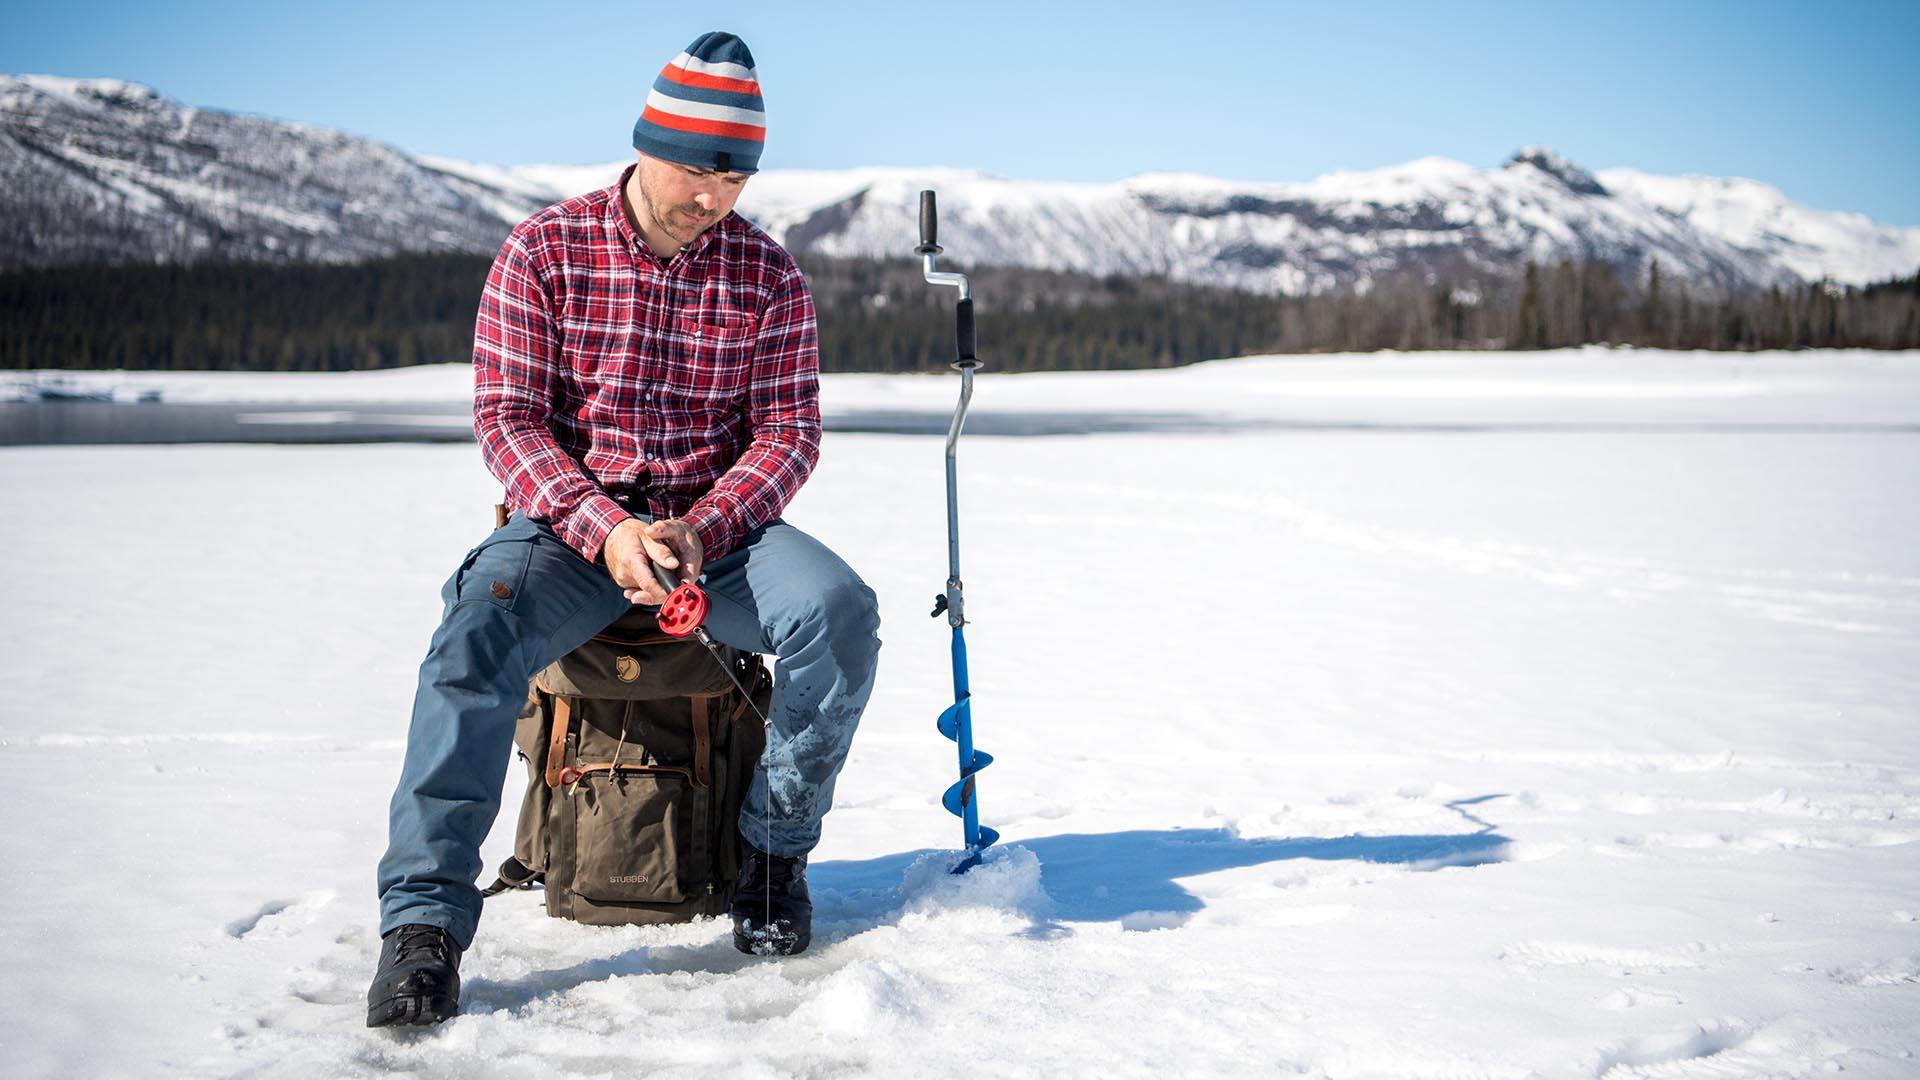 Ice fisherman in red-checked flannel sits on a ice-covered lake with mountains in the background.